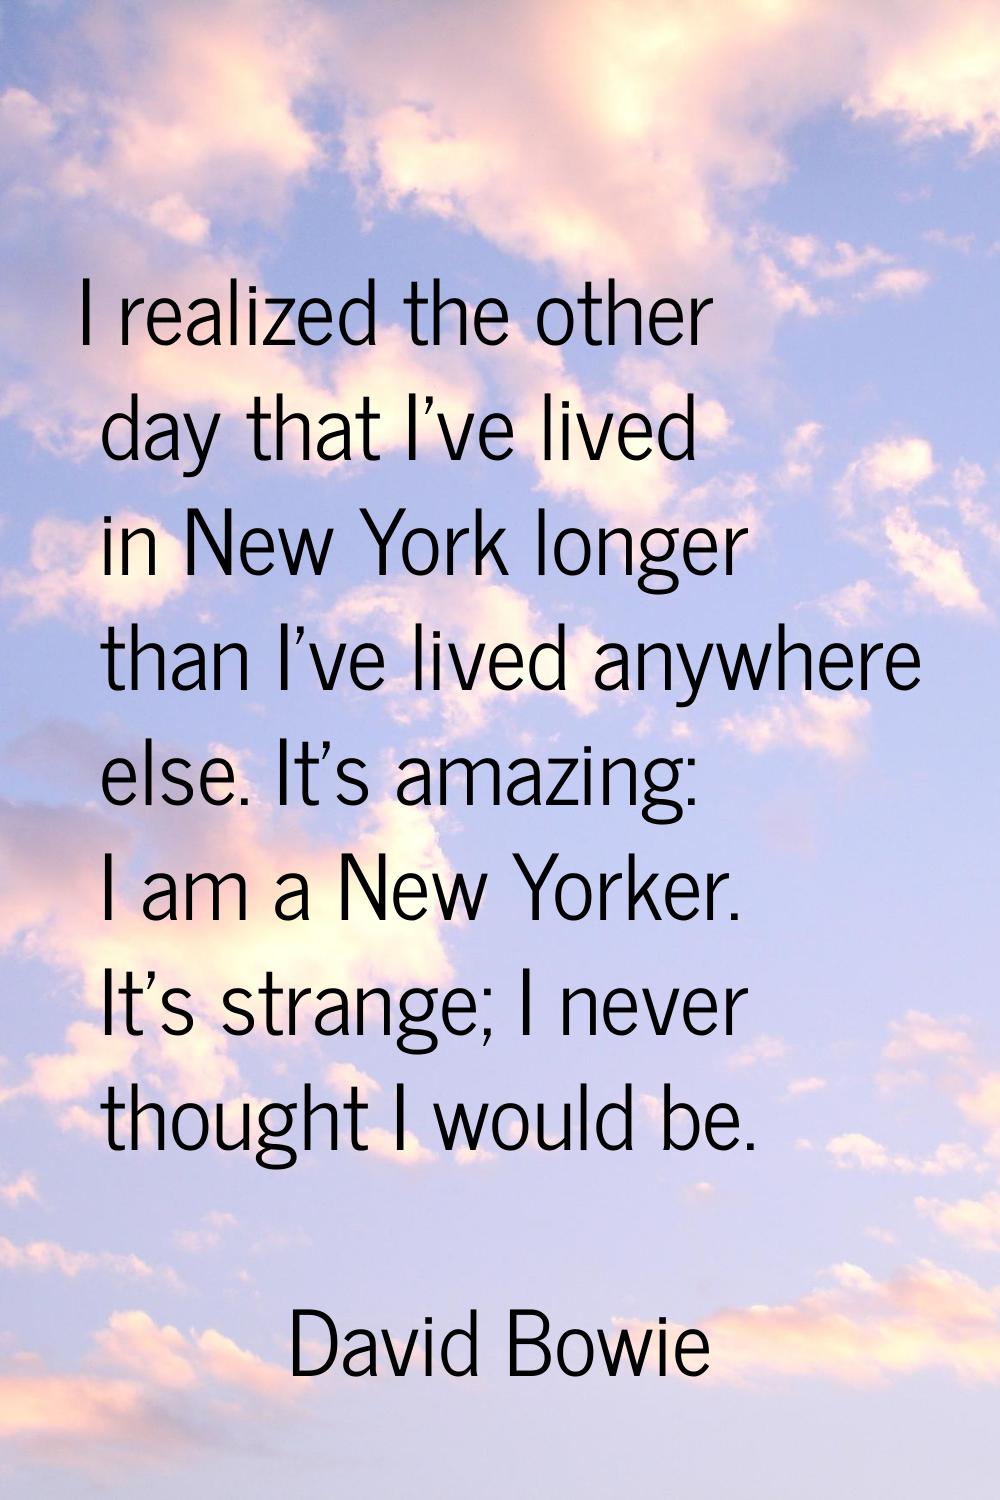 I realized the other day that I've lived in New York longer than I've lived anywhere else. It's ama